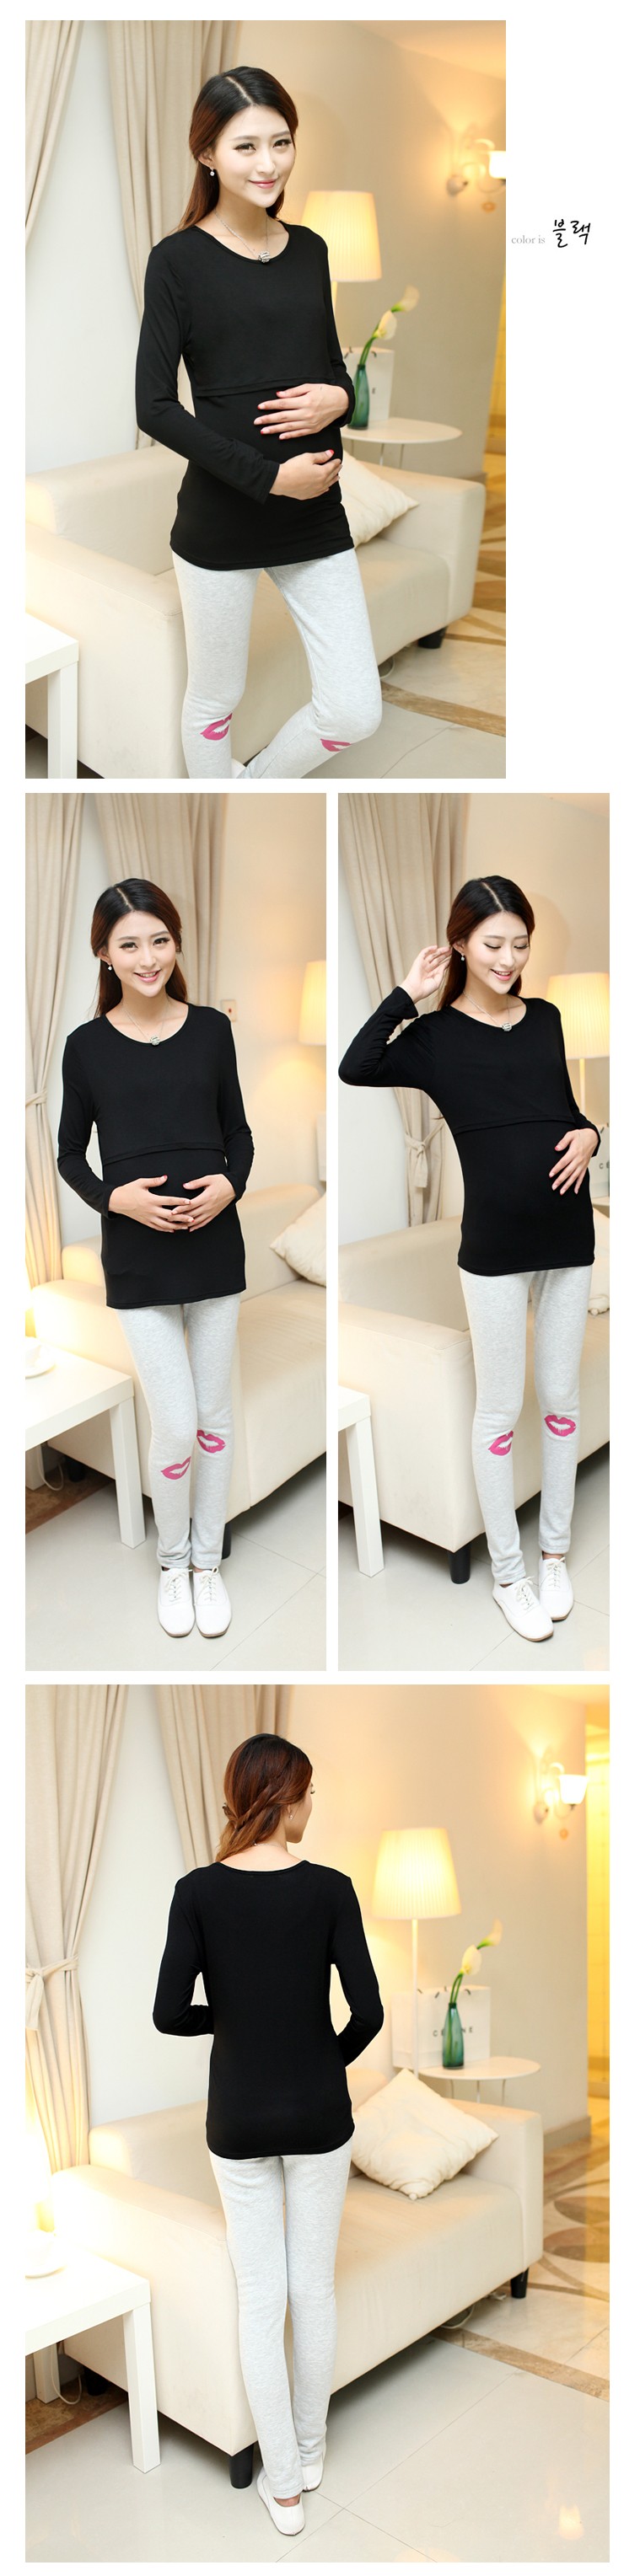 maternity women clothes